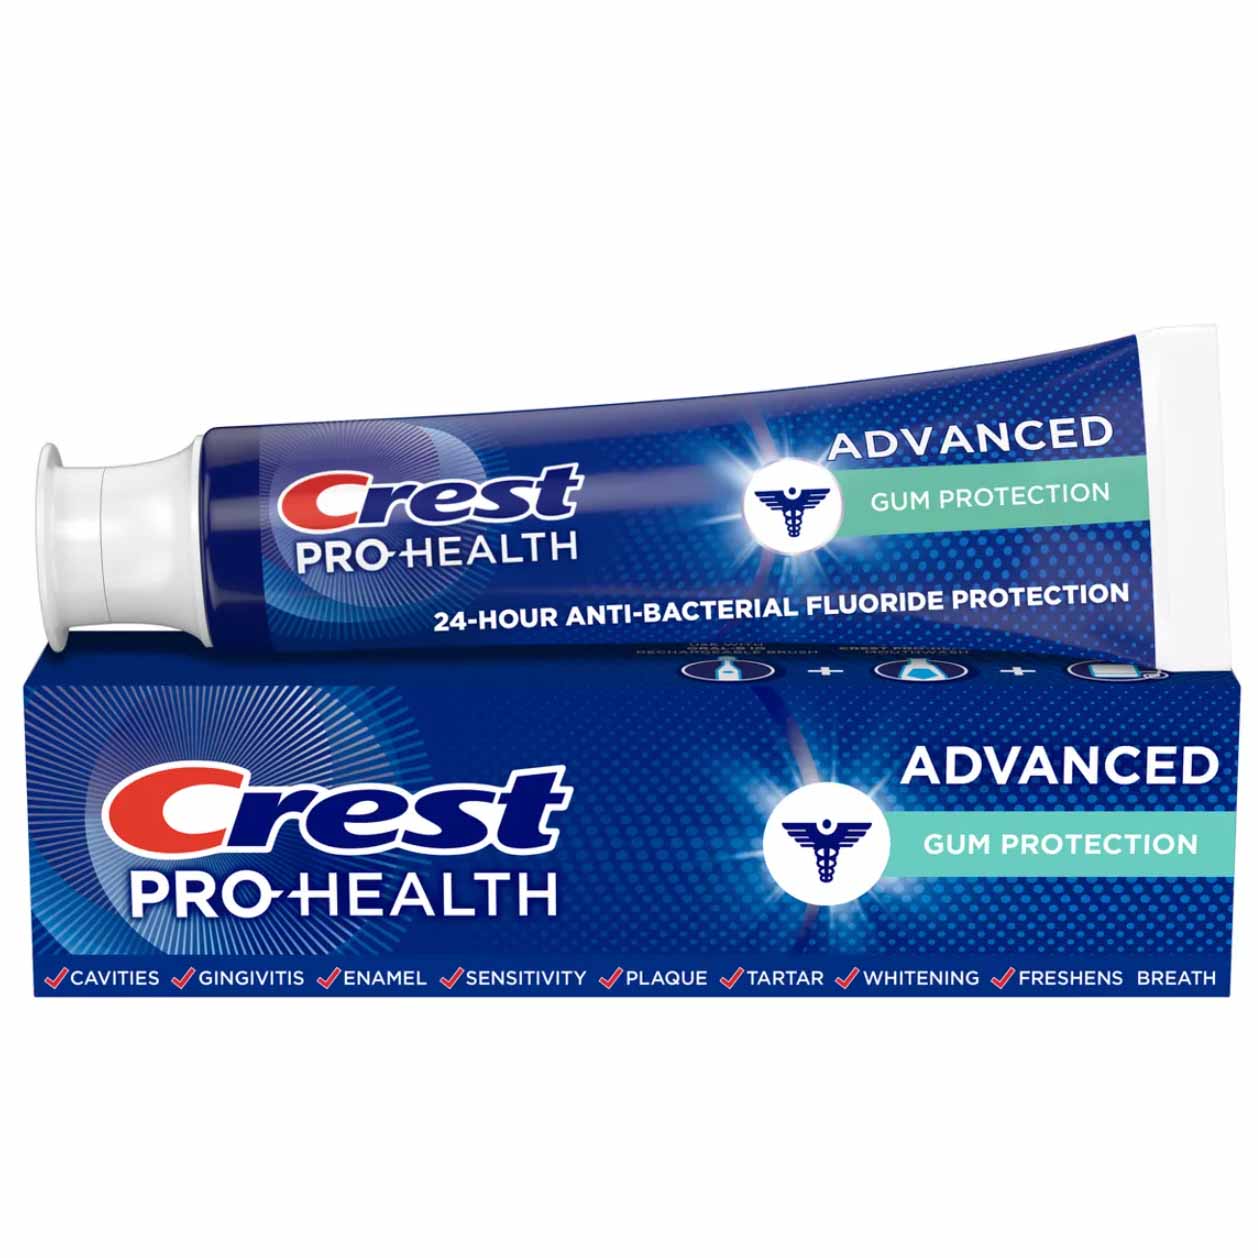 Crest Pro-Health Advanced Gum Protection Toothpaste